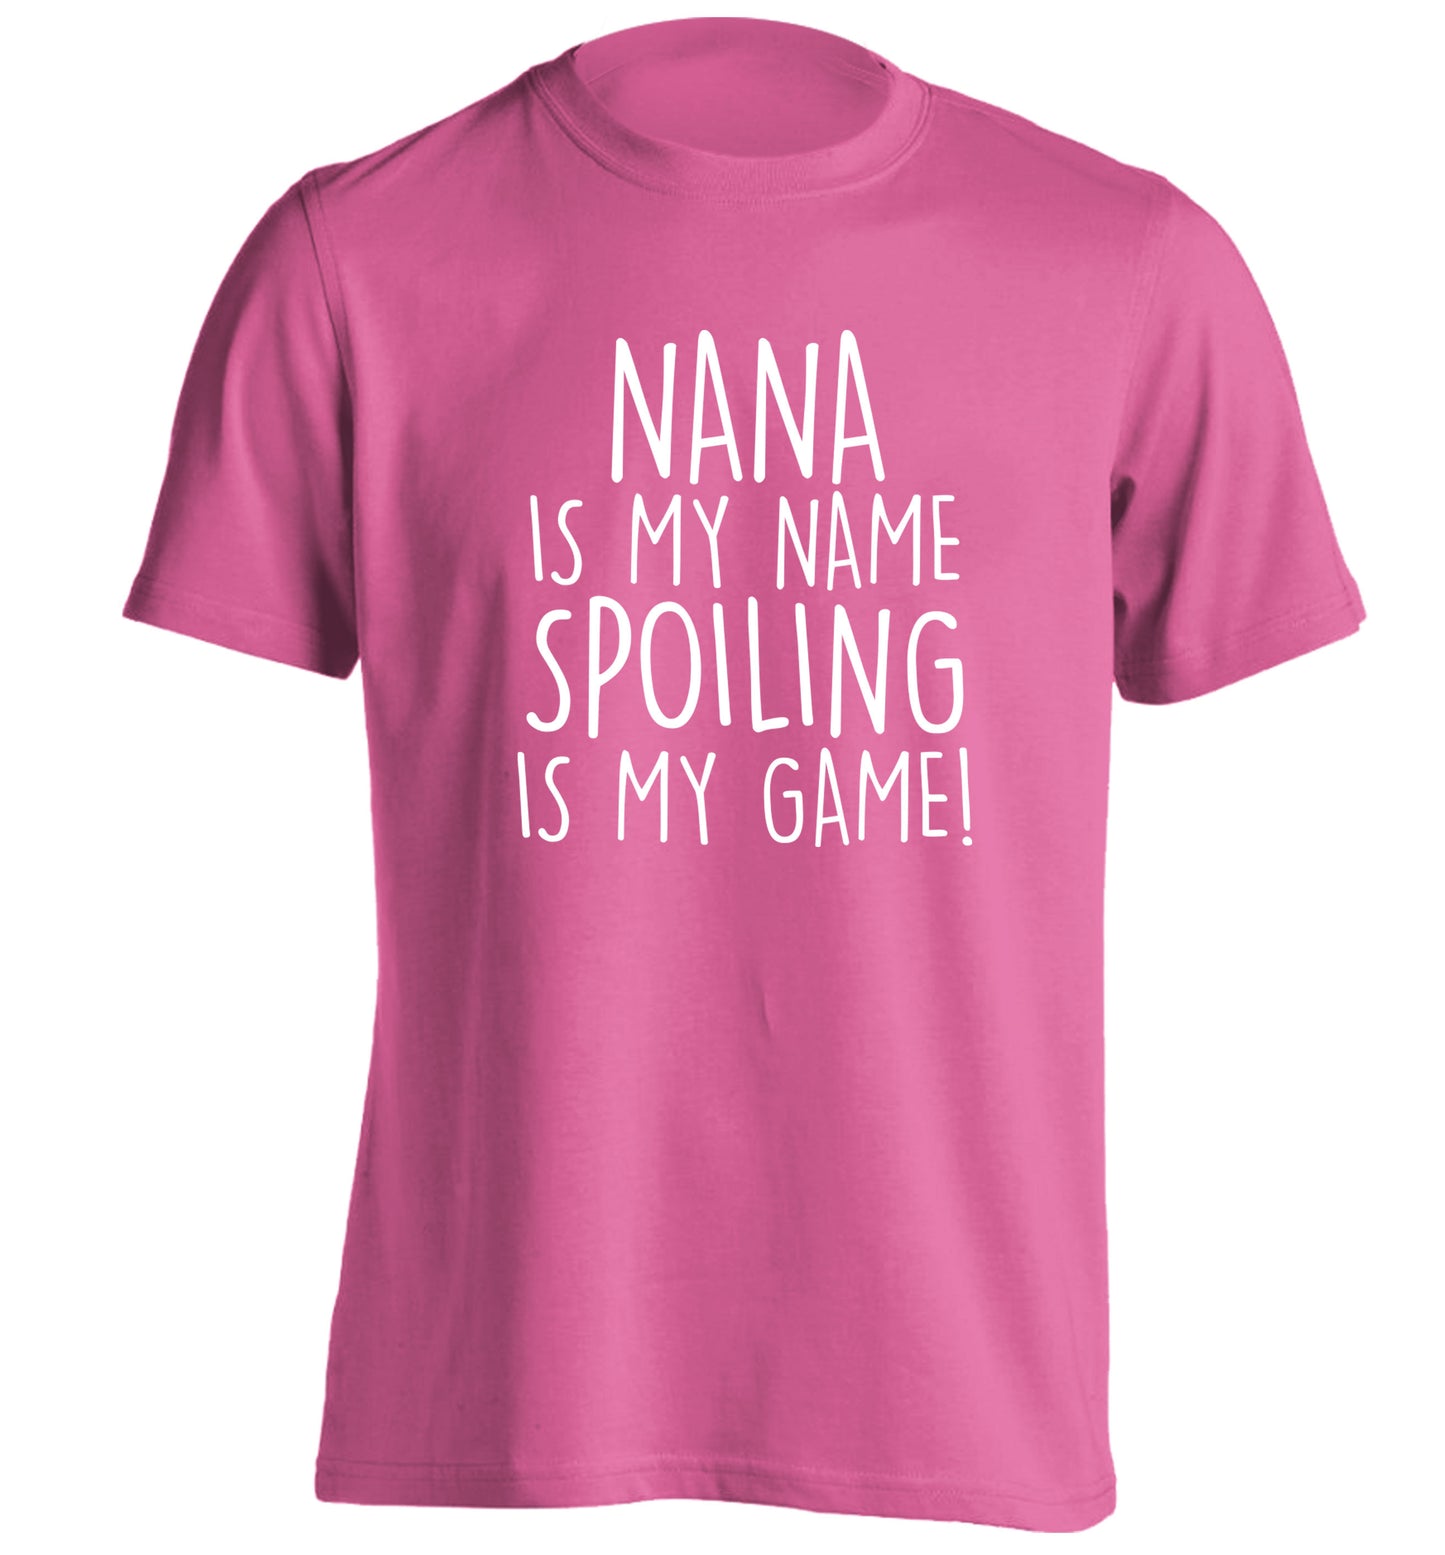 Nana is my name, spoiling is my game adults unisex pink Tshirt 2XL